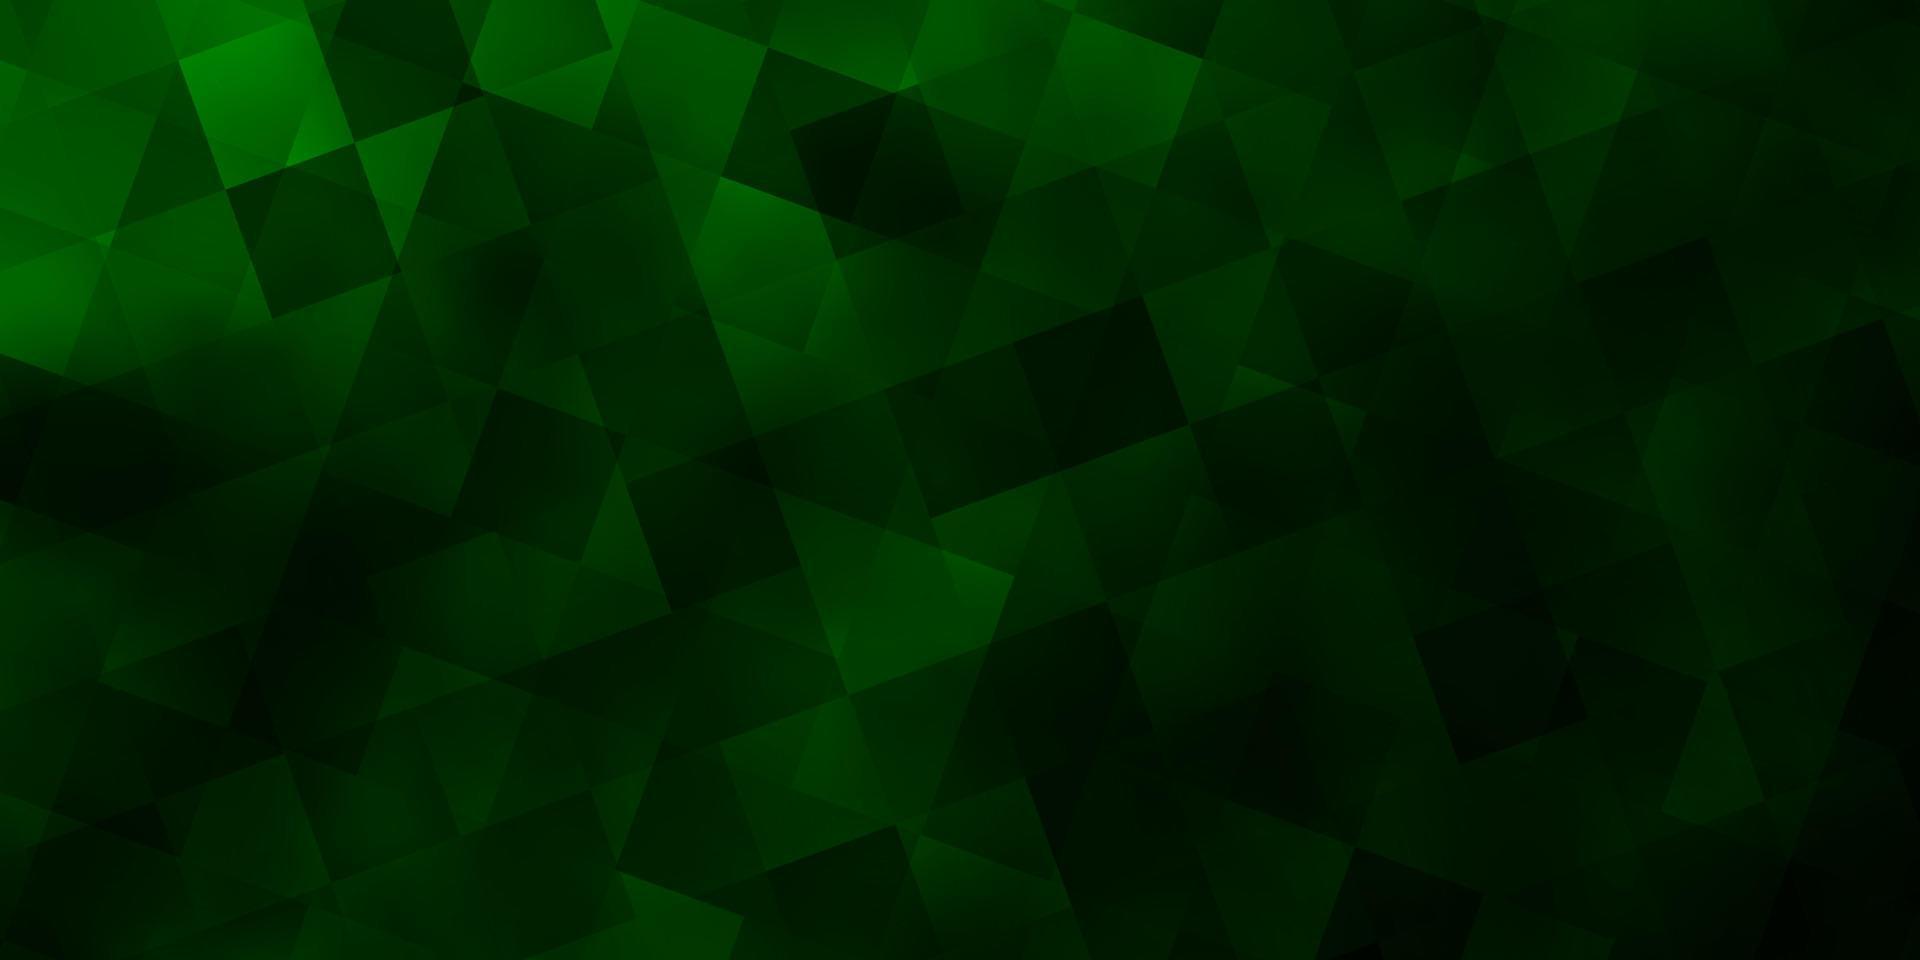 Light Green vector pattern with polygonal style with cubes.